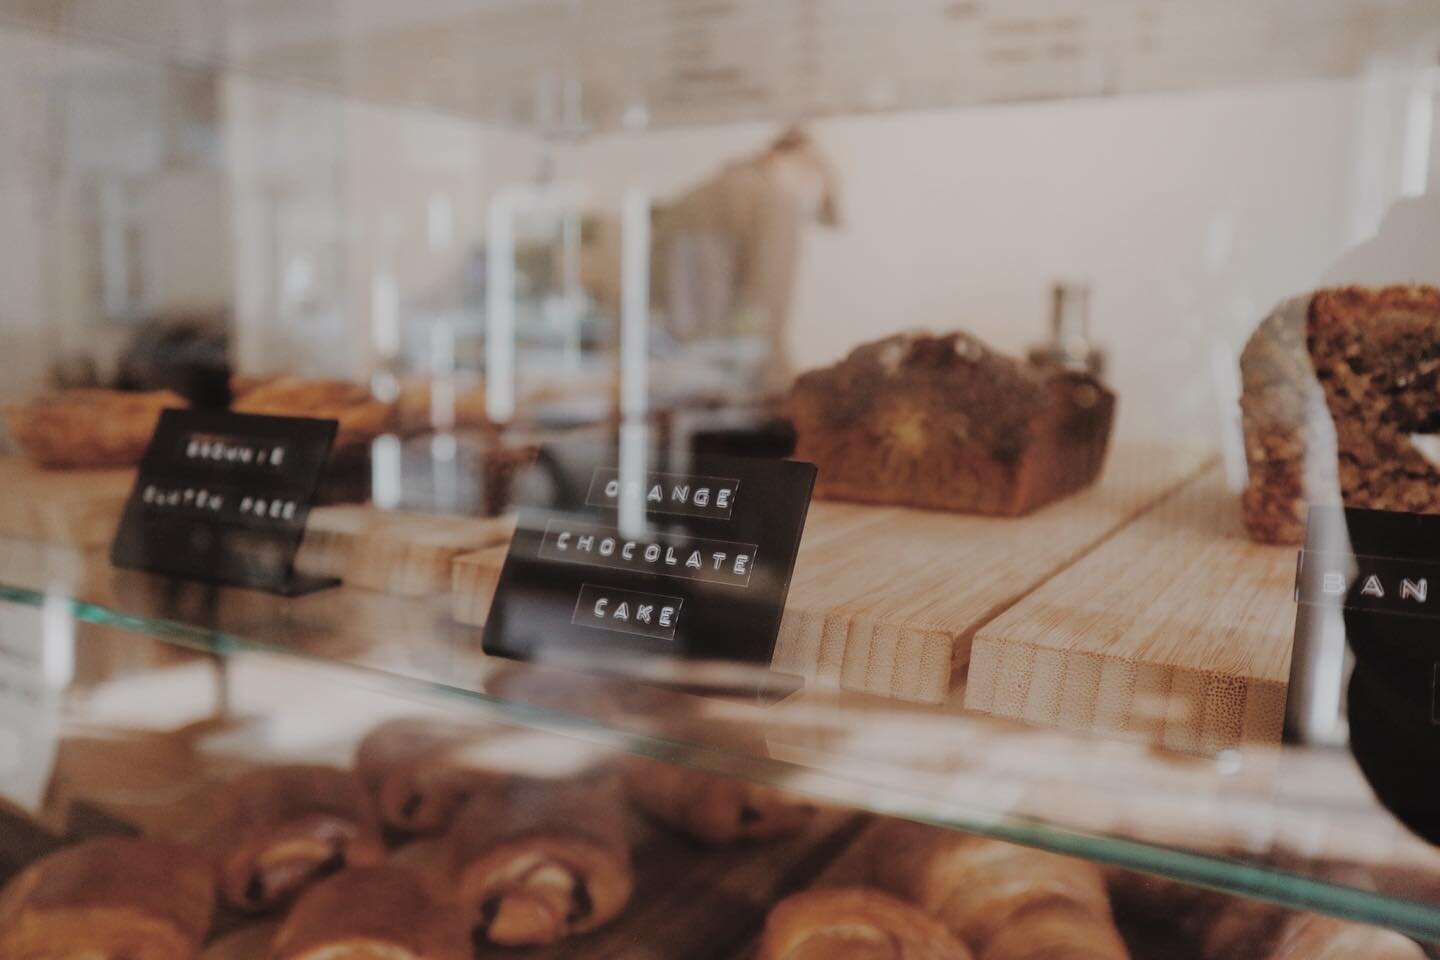 New display &amp; new cakes! 

We hope you are all enjoying the weekend ☀️ 

We are open every day of the week until 18:00. 

#specialtycoffee #homemade #homemadecakes #veganoptions #berlin #berlinmitte #auguststrasse #milchhalle #bestcoffeeberlin #c